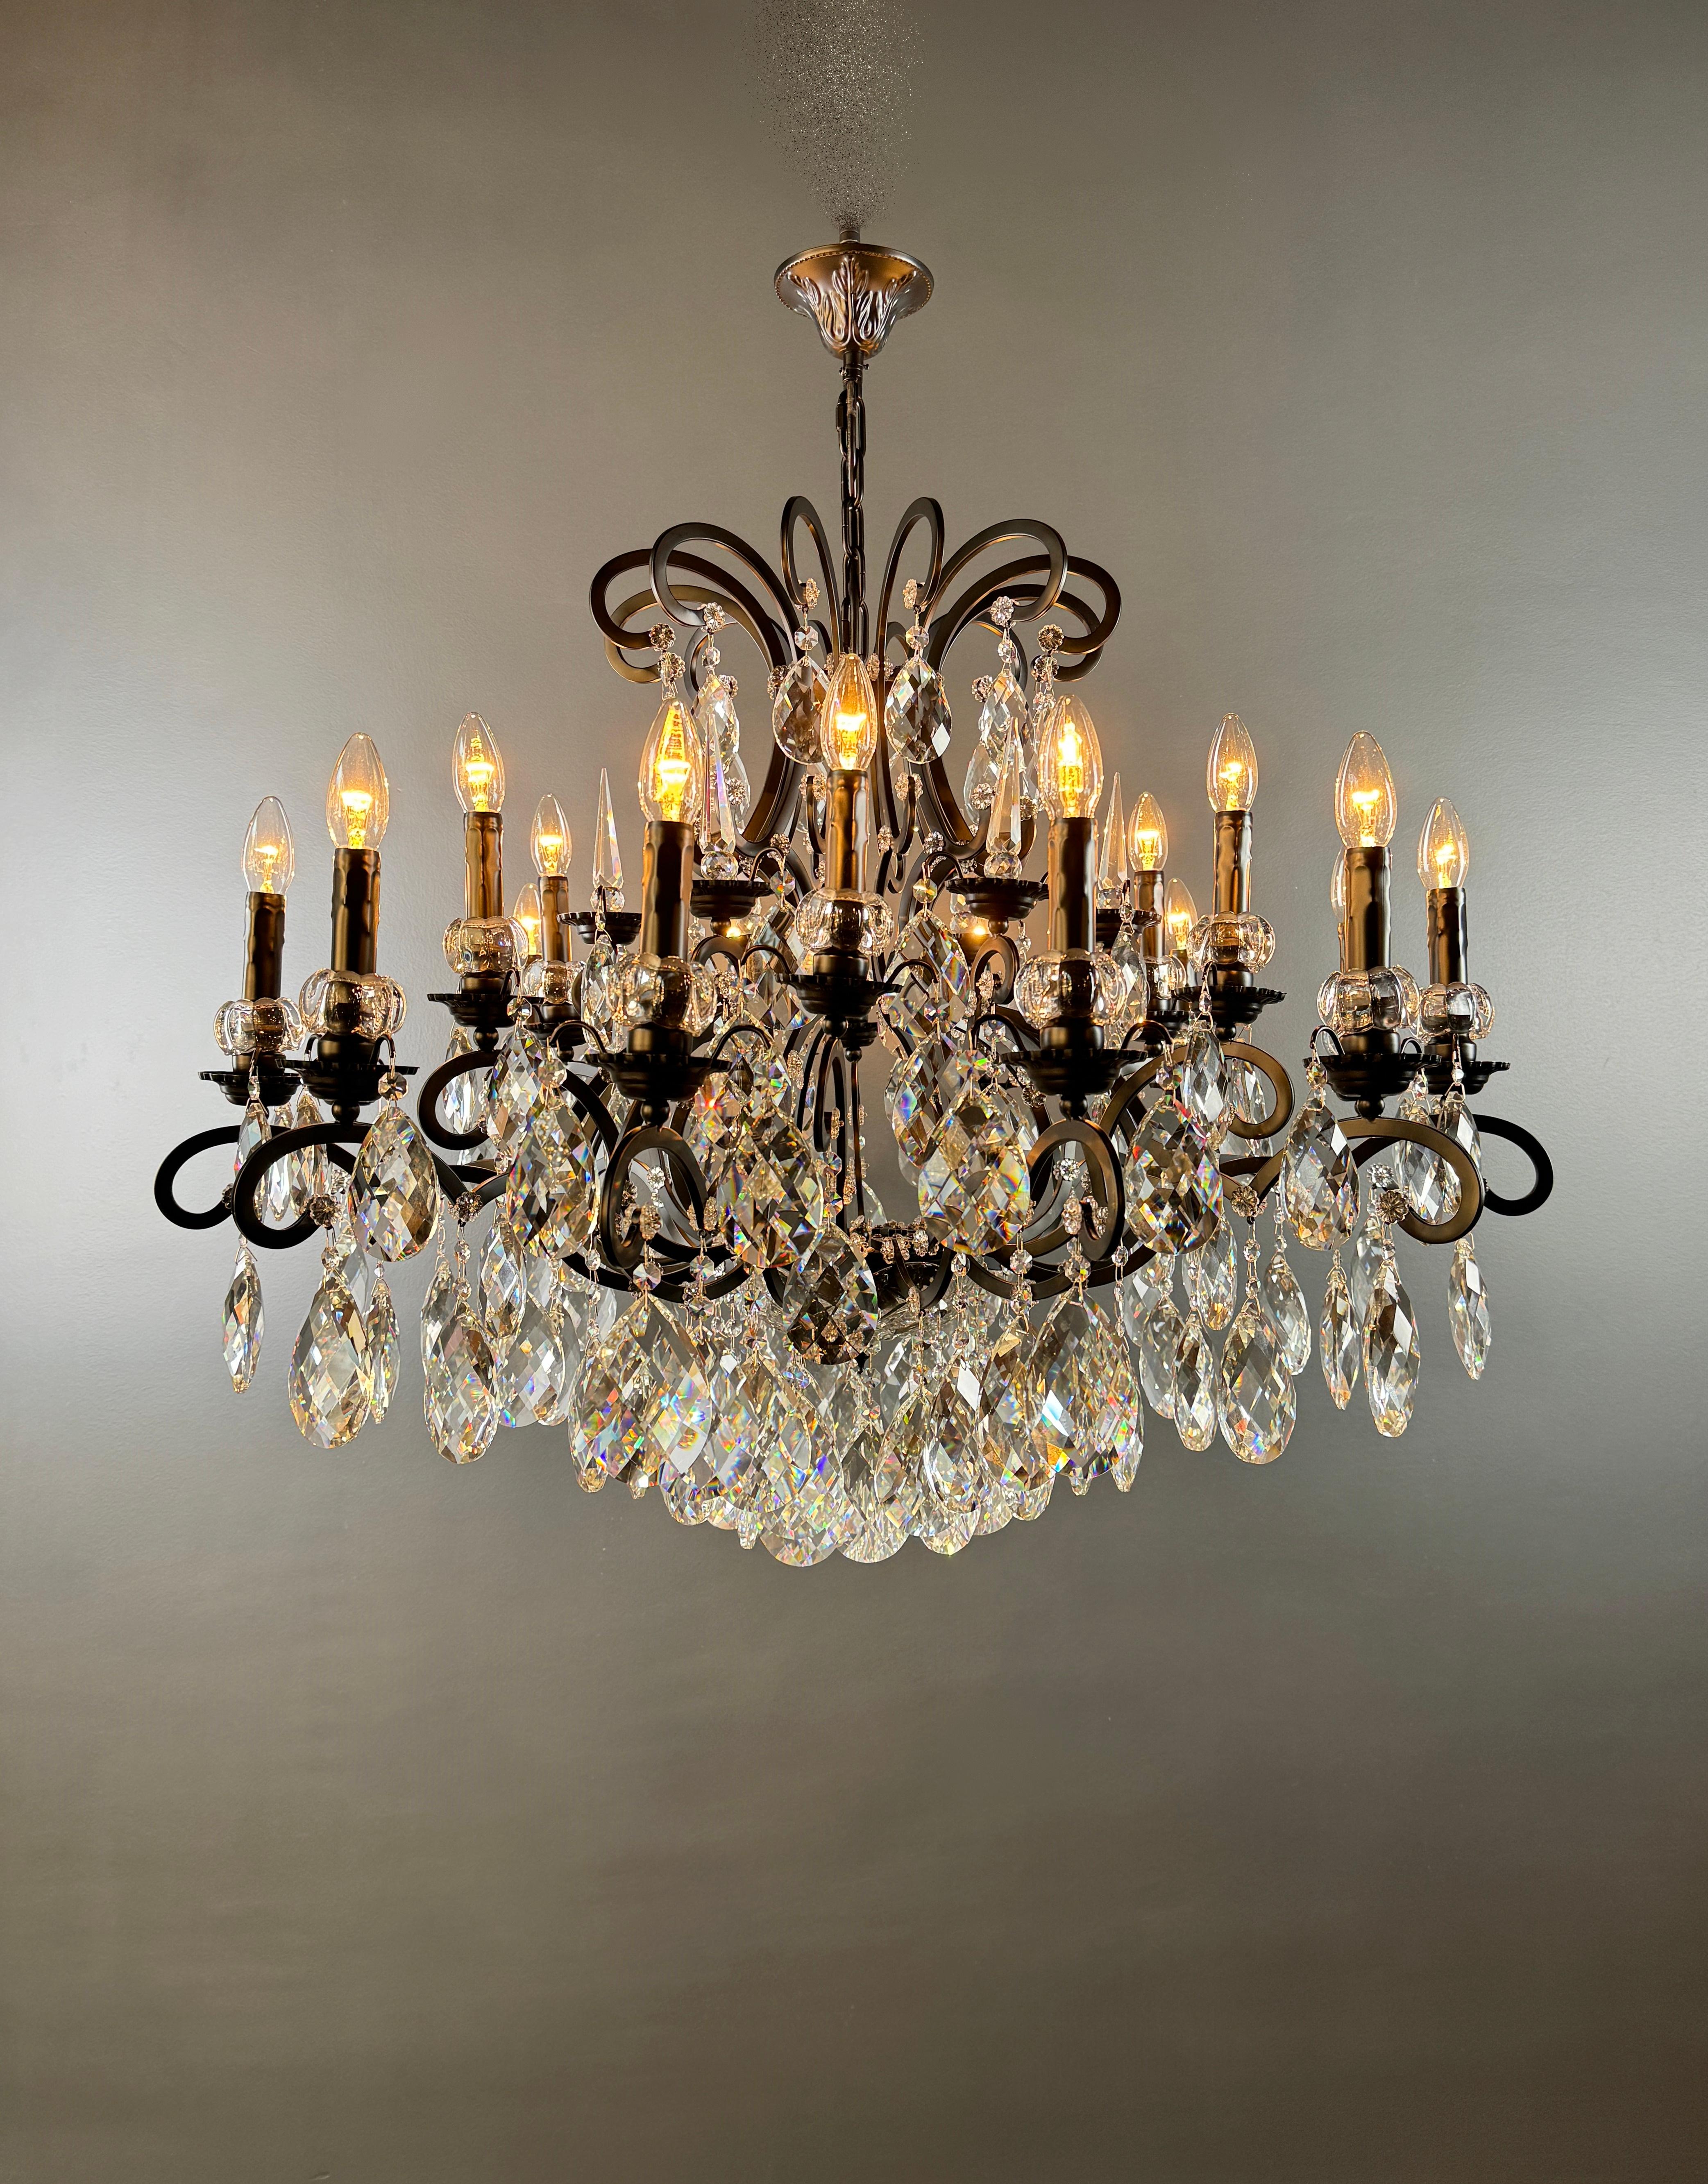 Light magic in perfection: Our majestic black chandelier

Do you want to add a royal touch to your home? Are you looking for a stunning lighting solution that combines elegance and glamour? Our majestic black chandelier is the answer to all your